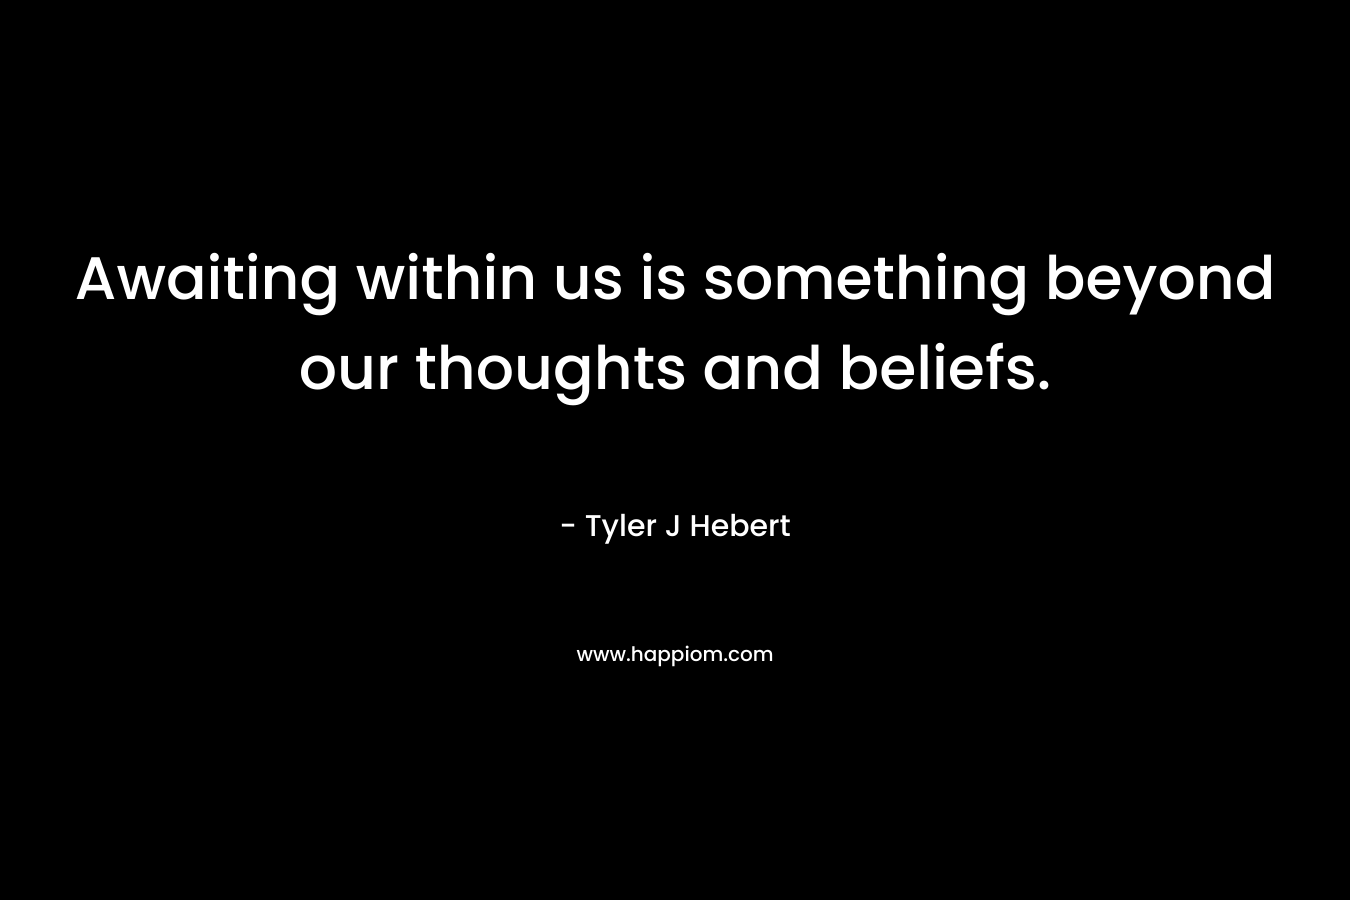 Awaiting within us is something beyond our thoughts and beliefs.